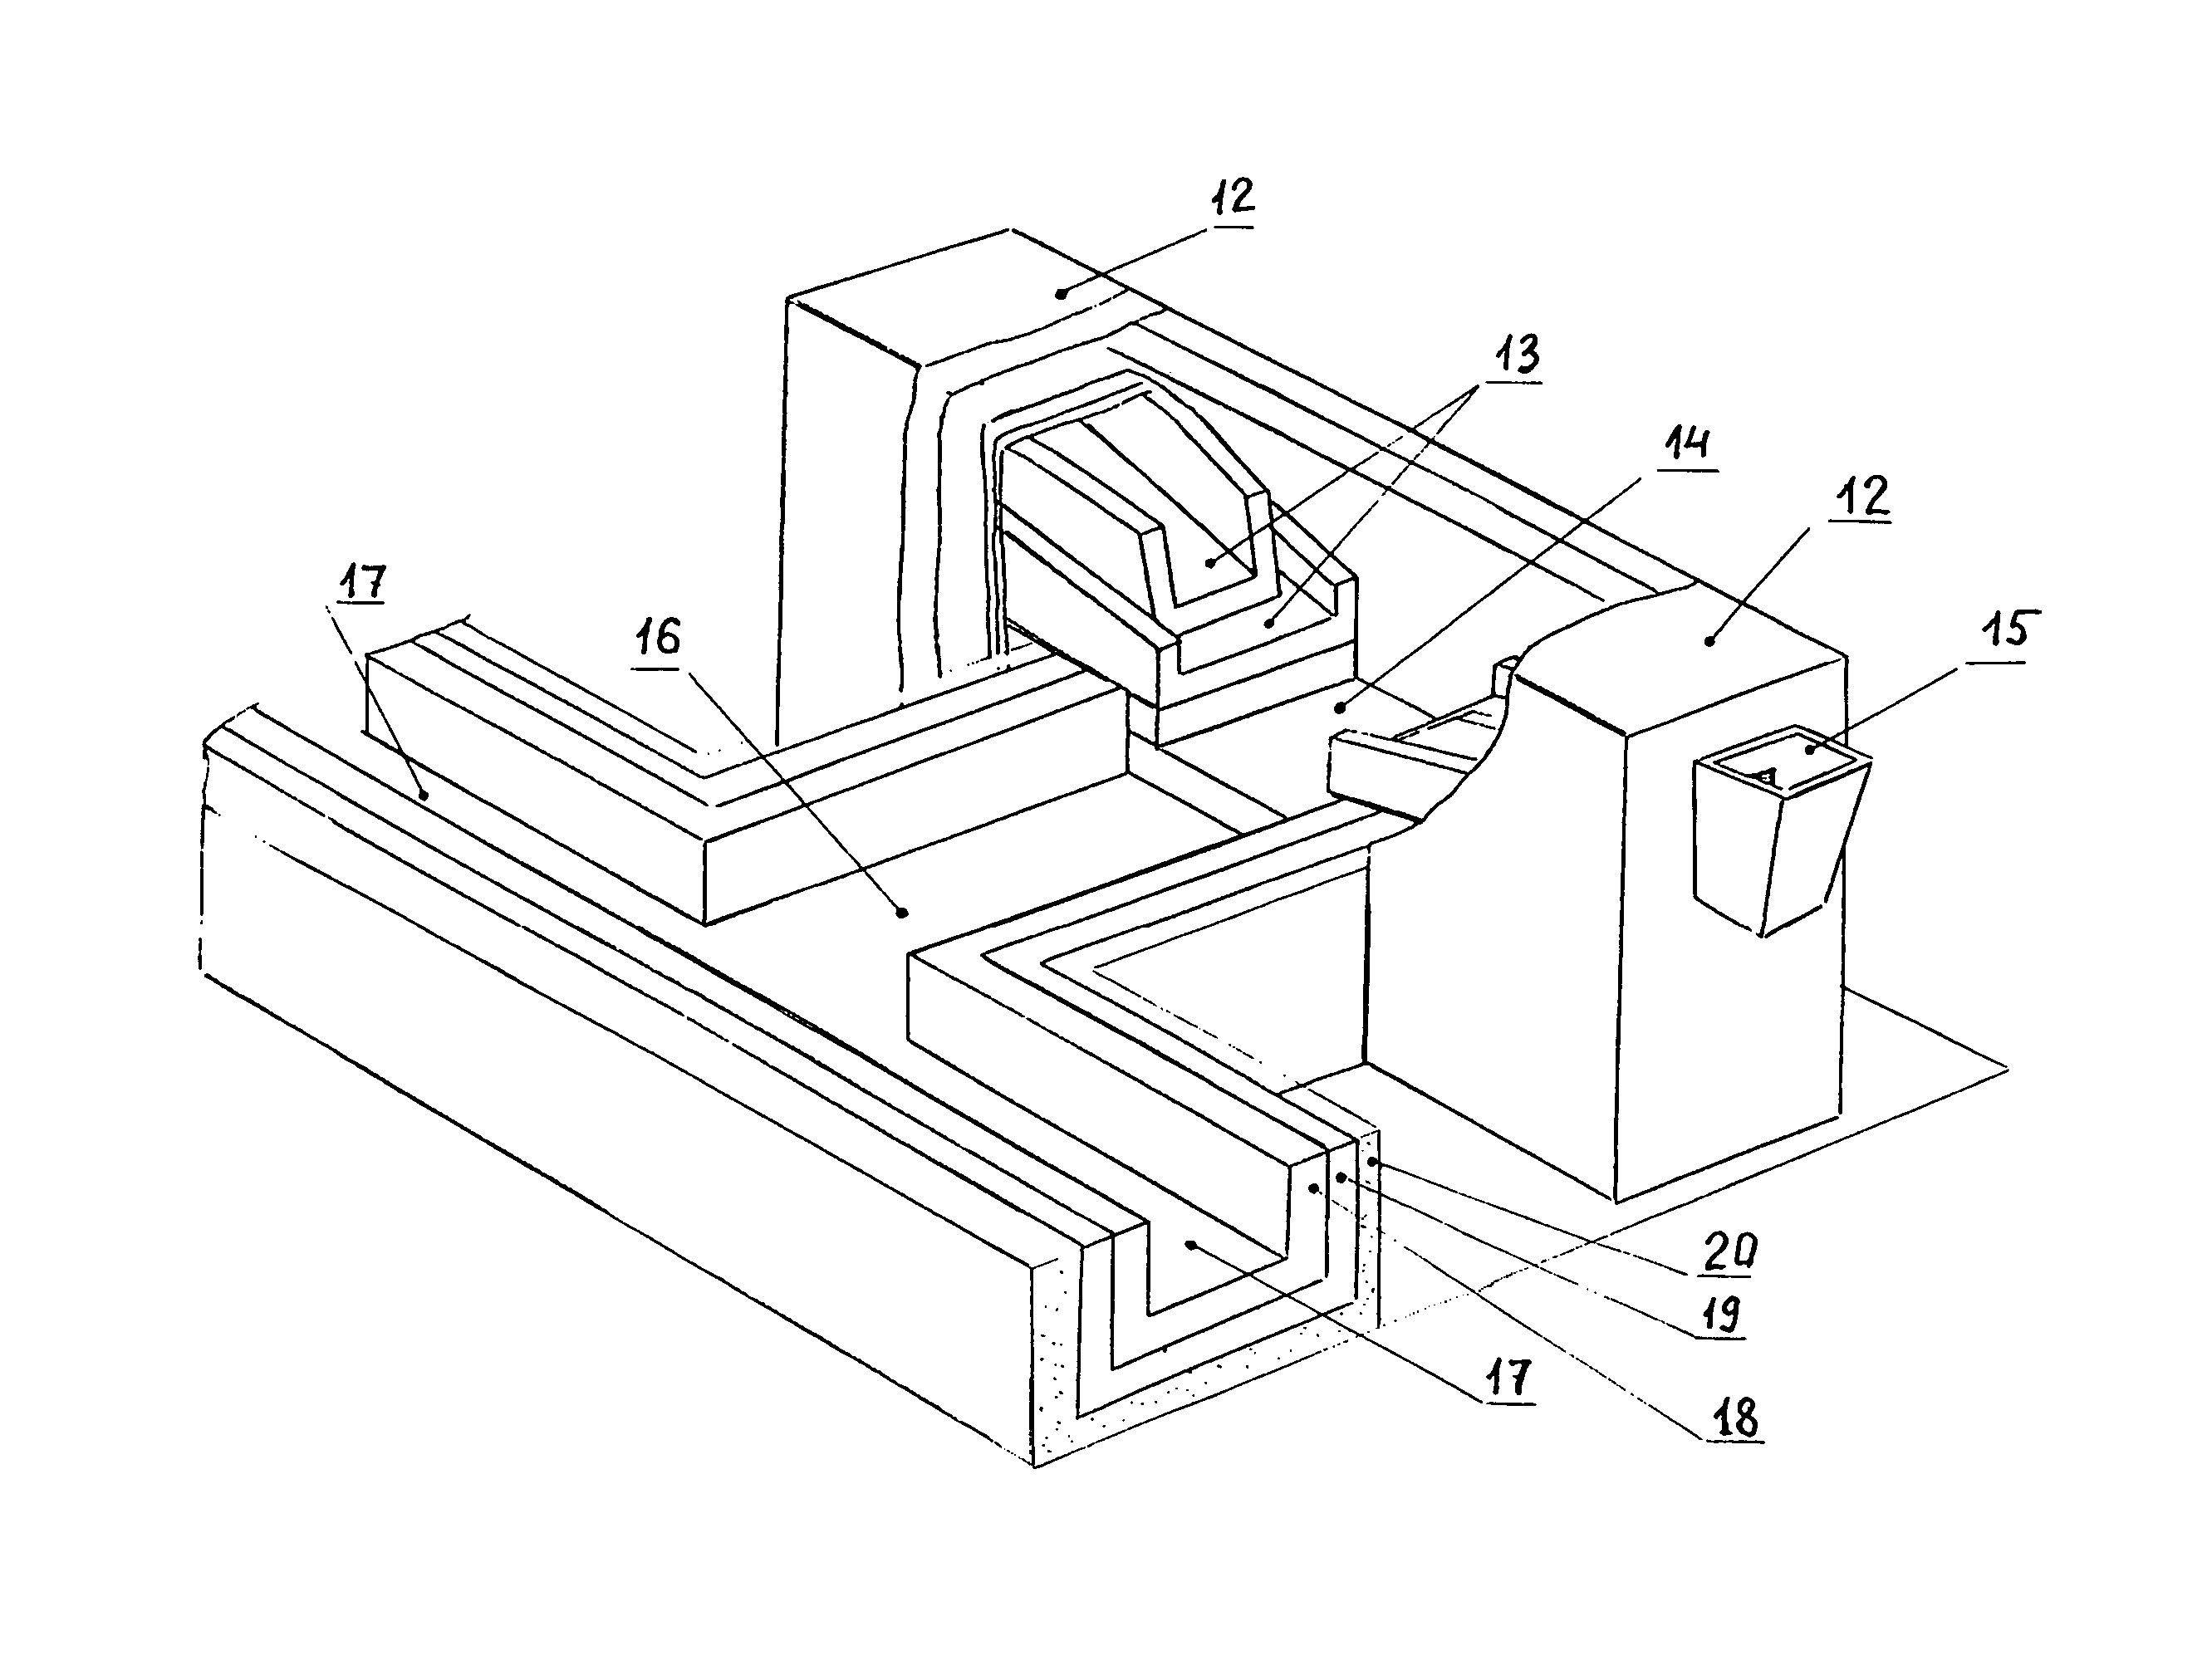 Ceramic bushing/s consisting local heating/s integrated in apparatus for manufacturing mineral/basalt fibers